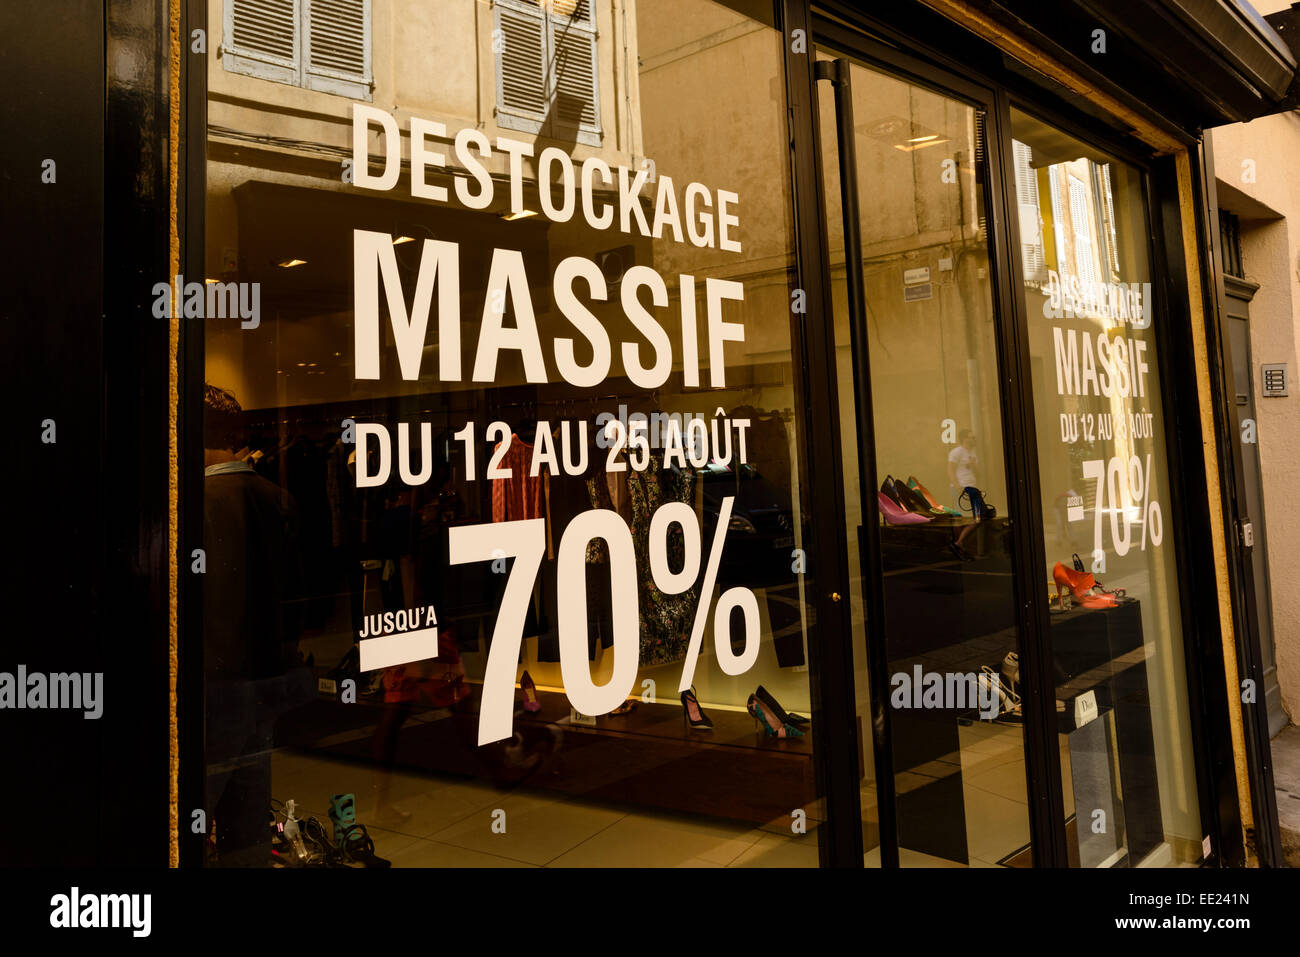 https://c8.alamy.com/comp/EE241N/stock-clearance-up-75-sale-sign-in-a-shoe-retail-shop-in-aix-en-provence-EE241N.jpg